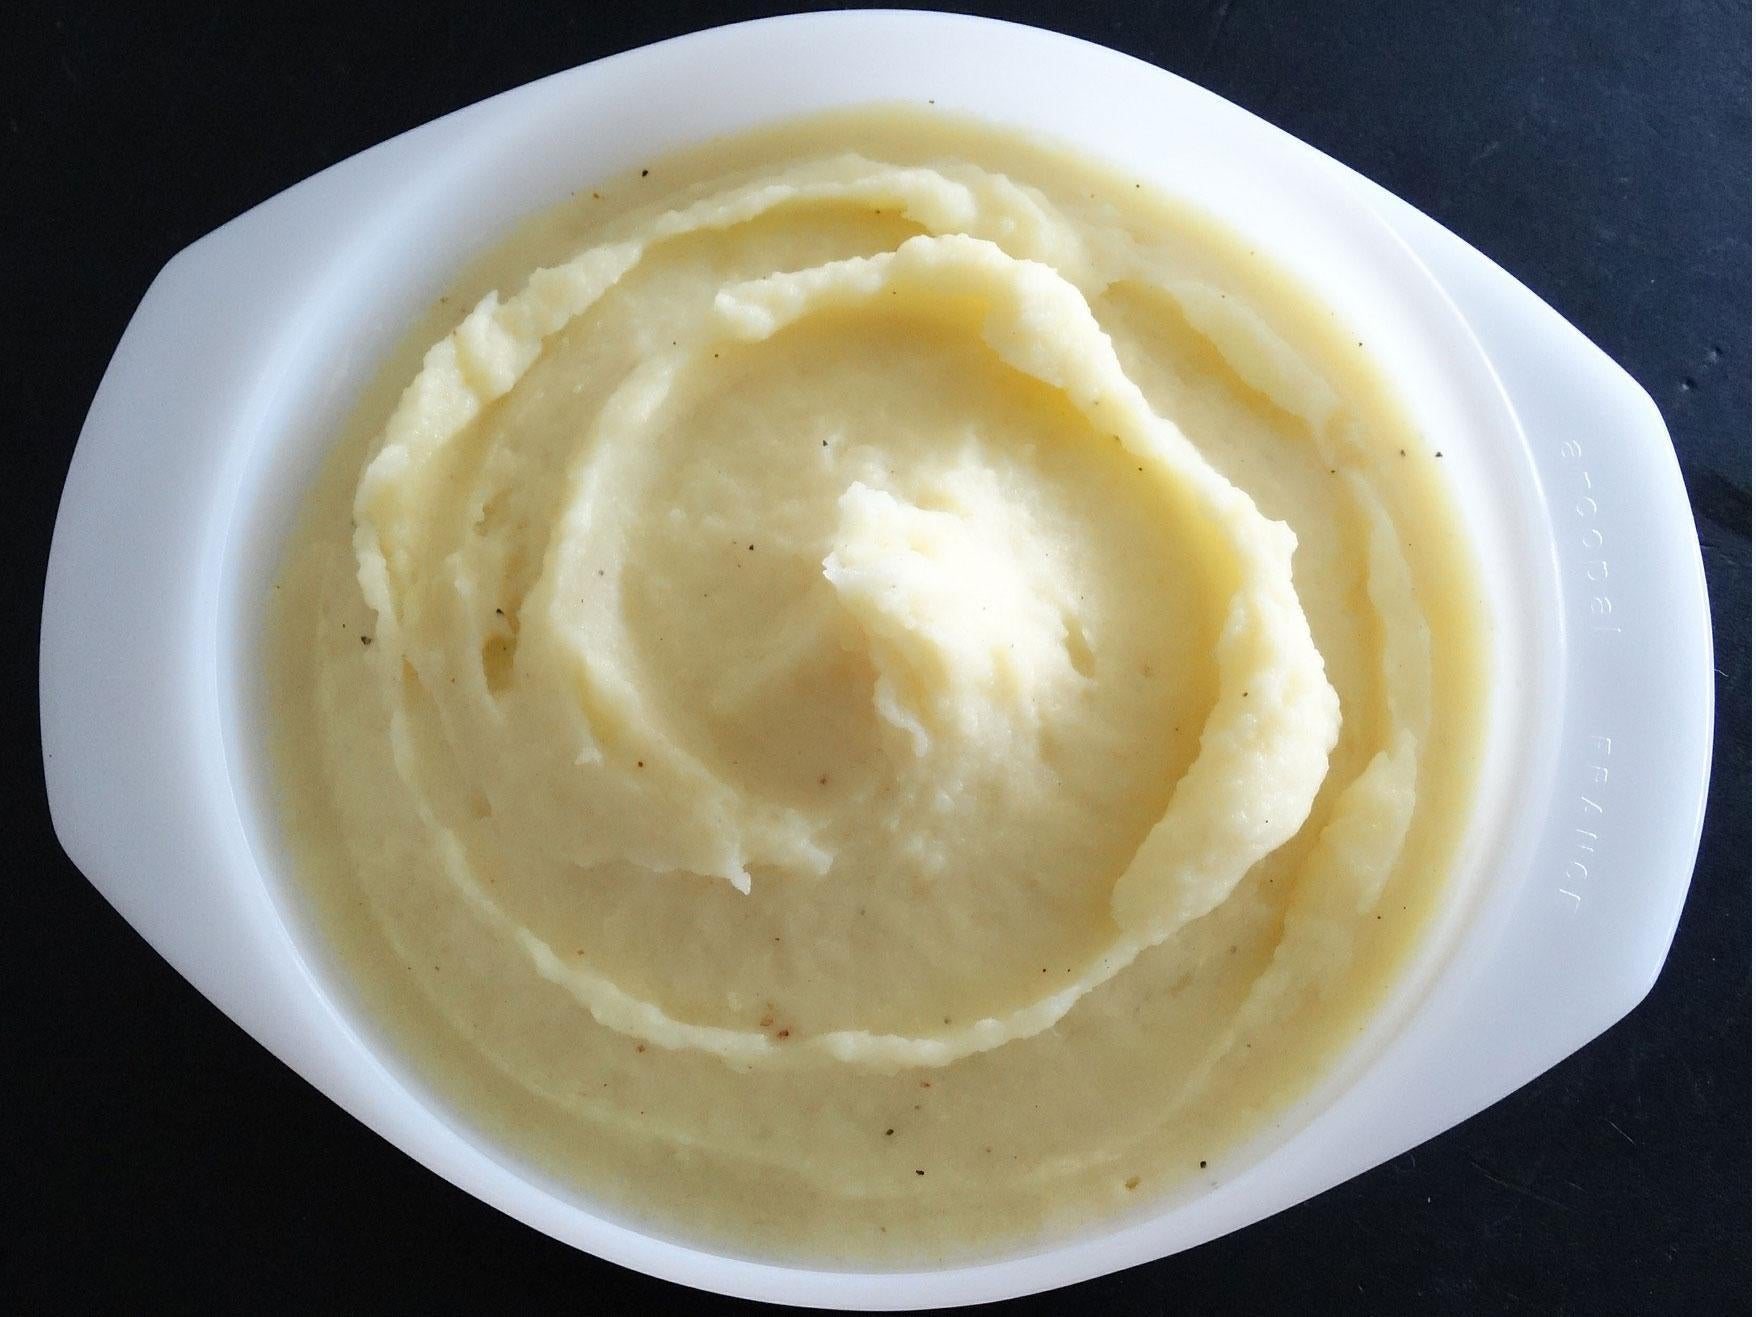 Mashed potatoes, traditionally served with gravy. But could coffee become a replacement?